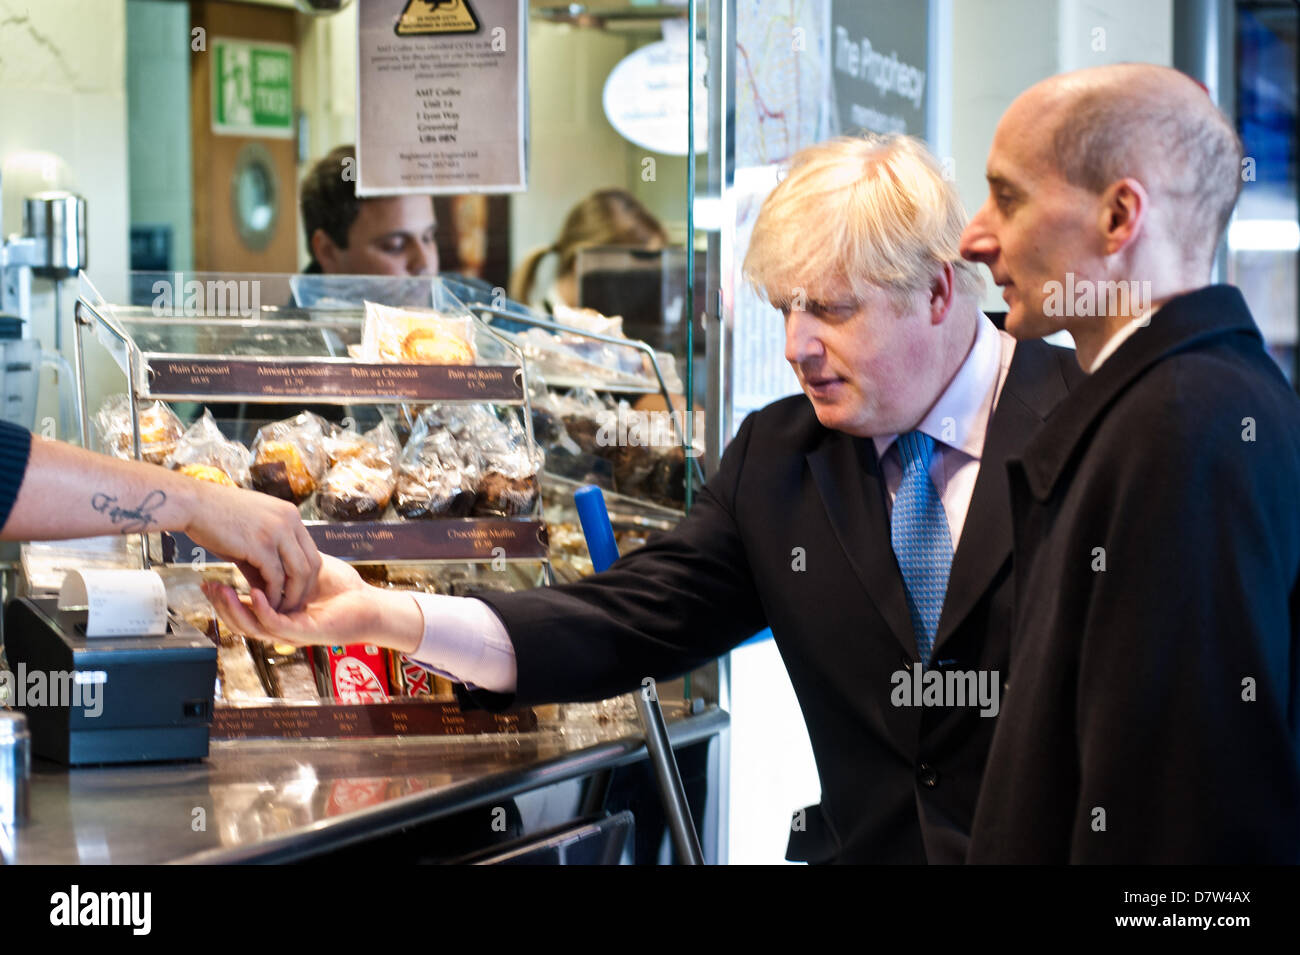 London,UK - 14 May 2013: The Mayor of London, Boris Johnson, pays for a coffee at a bar after leading a short walkabout around Wimbledon High Street to meet local people as he helps launch a public consultation on proposed routes for Crossrail 2. Credit: Piero Cruciatti/Alamy Live News Stock Photo